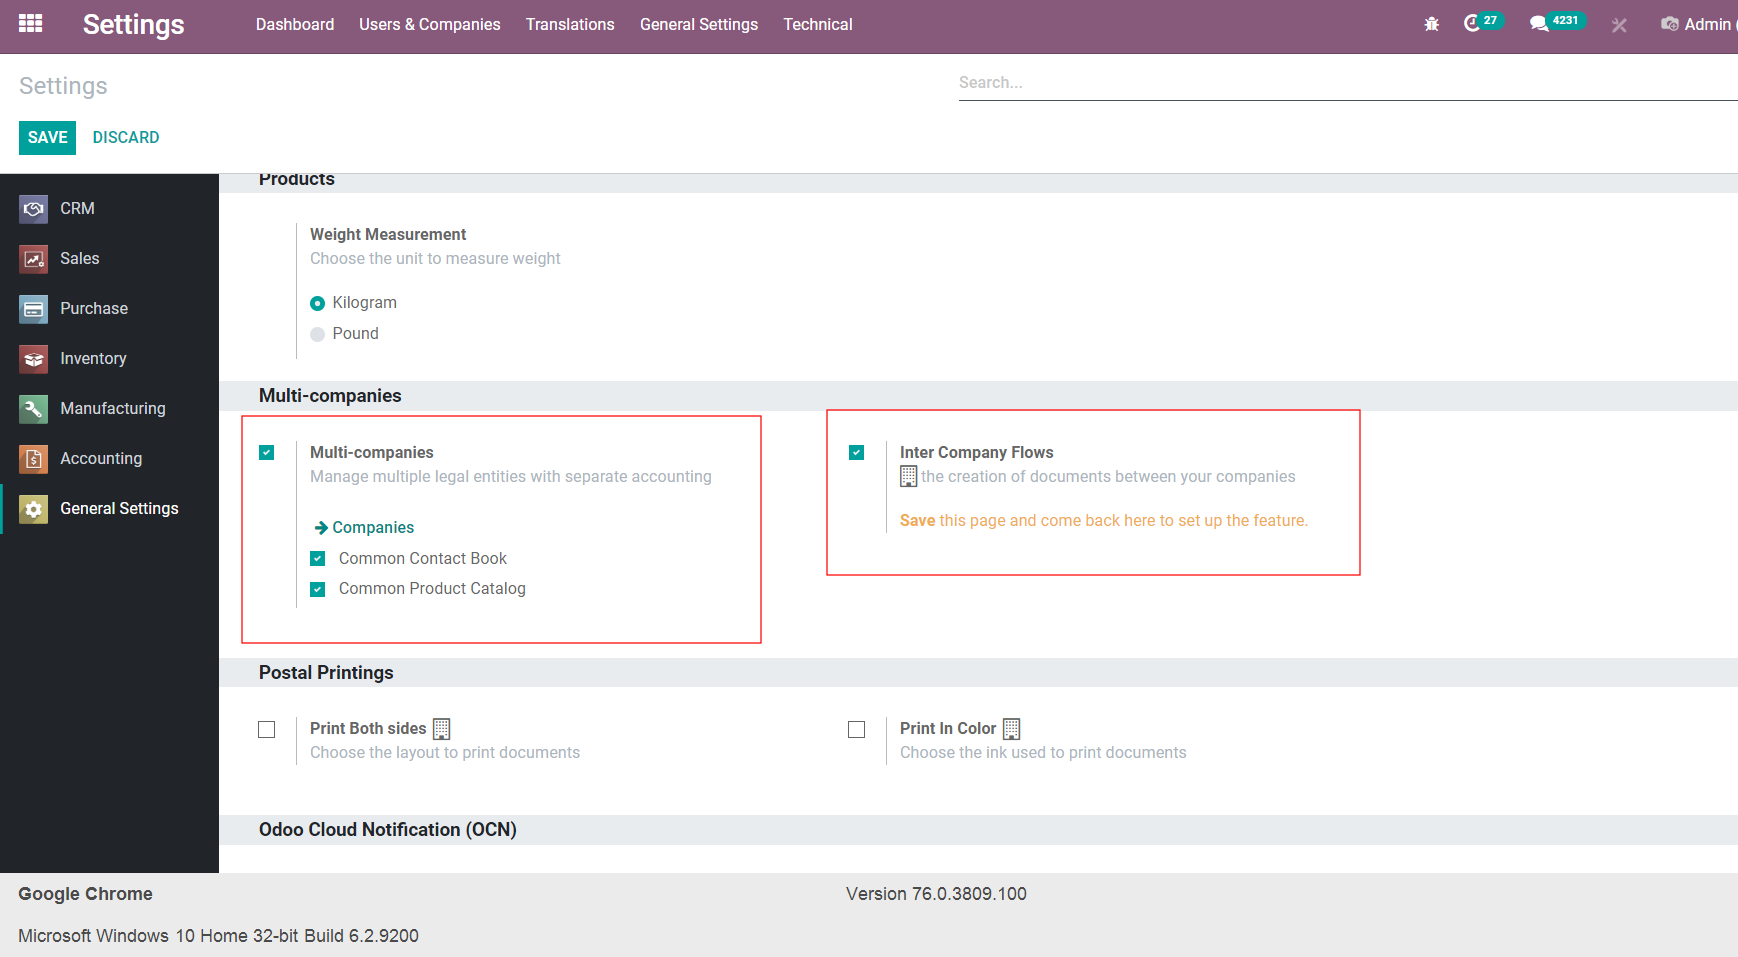 Configuring Multi-Company Functionality in Odoo Enterprise